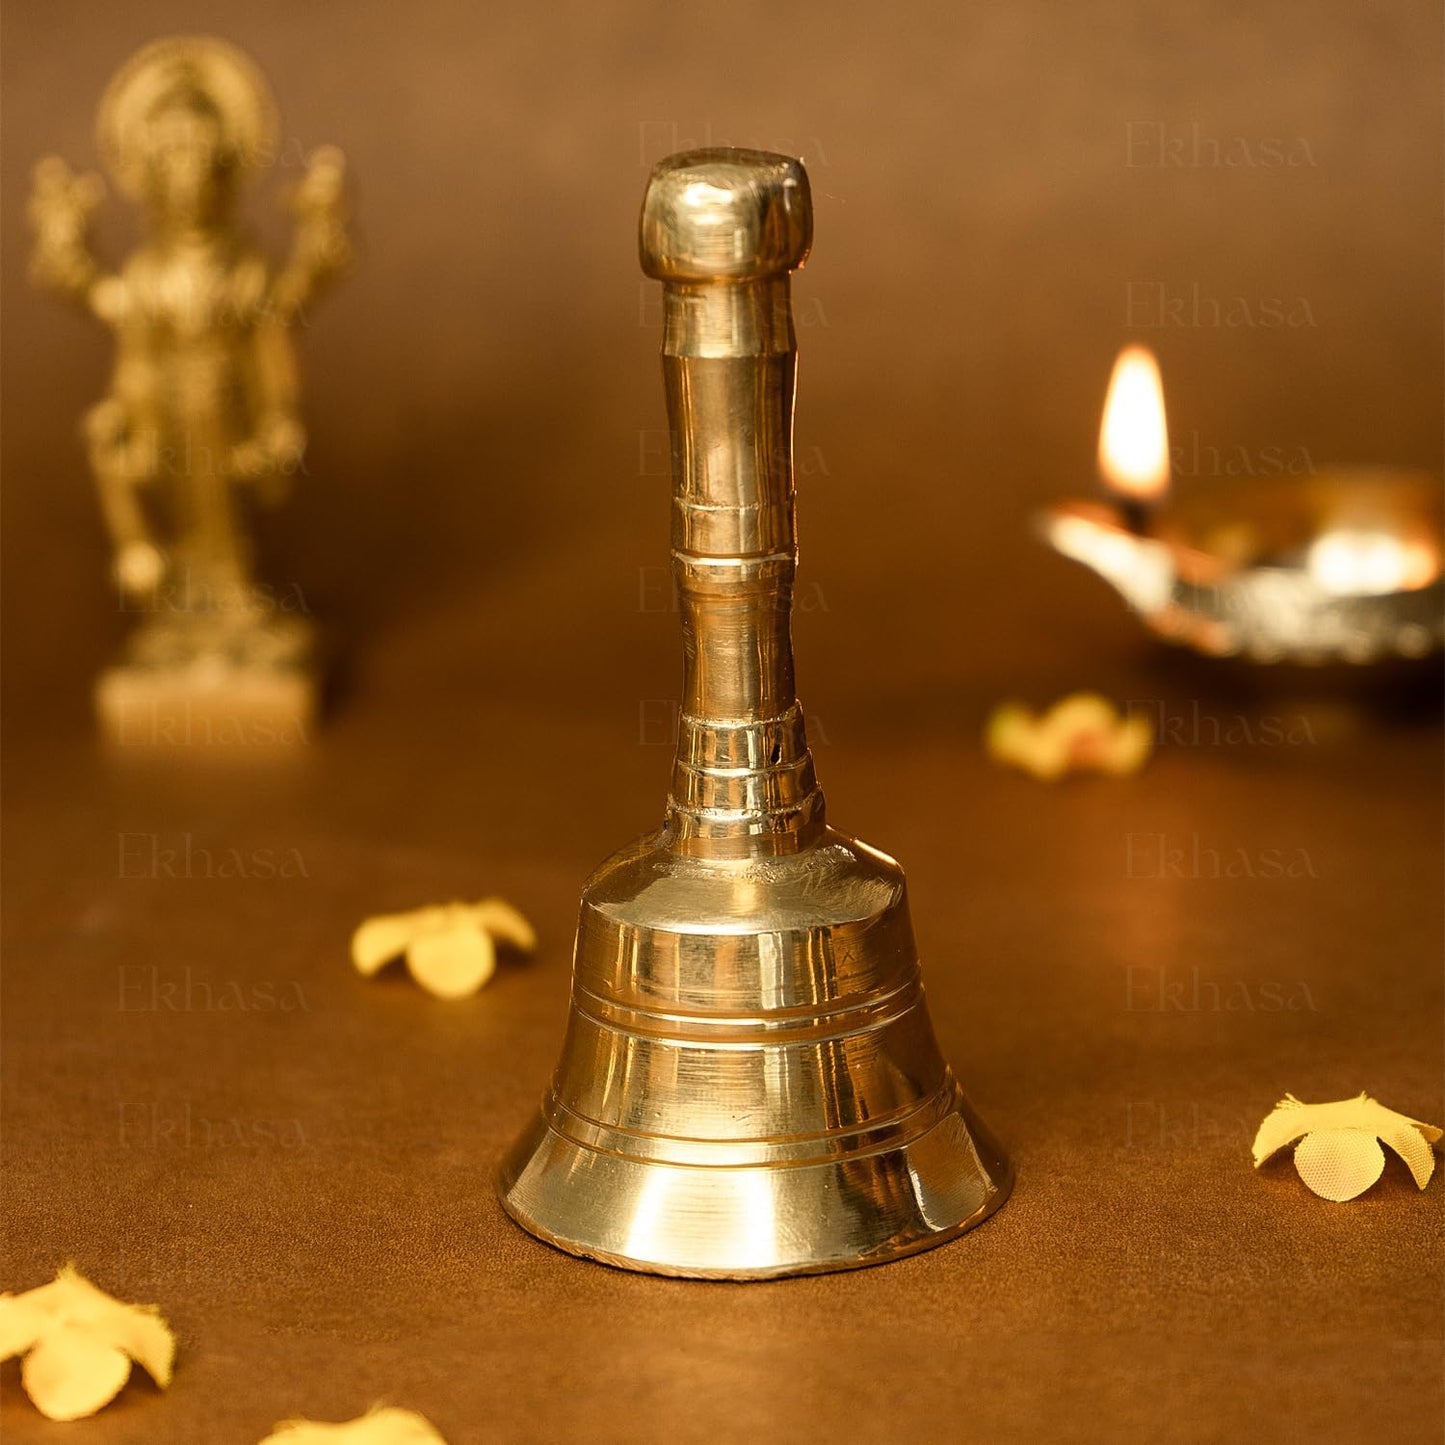 Ekhasa 100% Pure Brass Gol Ghanti for Pooja | Handcrafted Pooja Bell for Mandir | Pooja Ghanti for Home | Mandir Ghanti for Pooja | Ganti for Pooja | Puja Ghanti for Home (Size 4 inch)